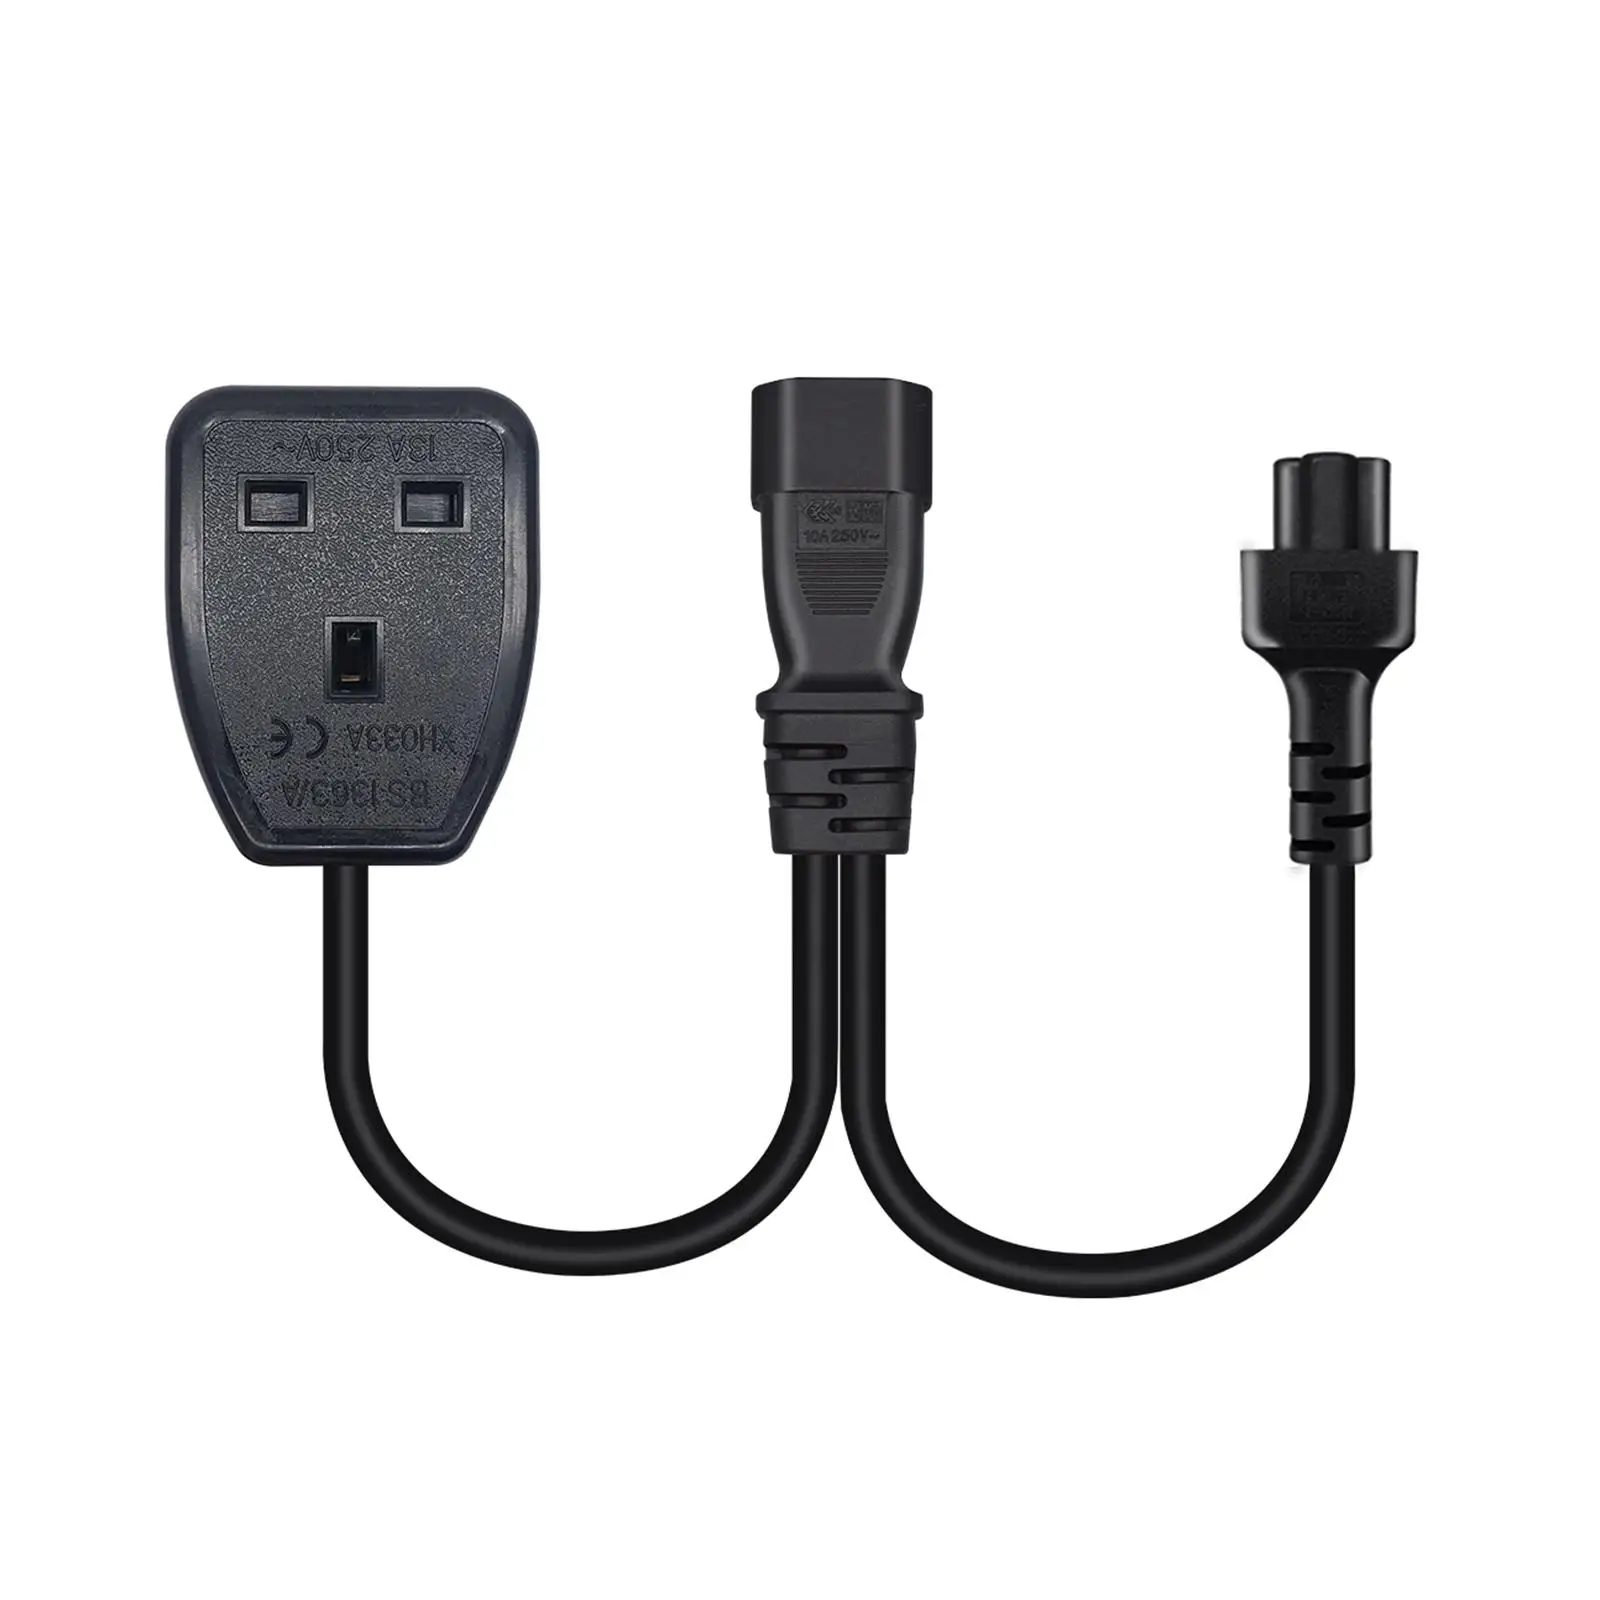 Y Splitter Power Cord C14 to  + UK 250V 2500W 0.32M 1ft Male to Female Black Adapter Cable Connector